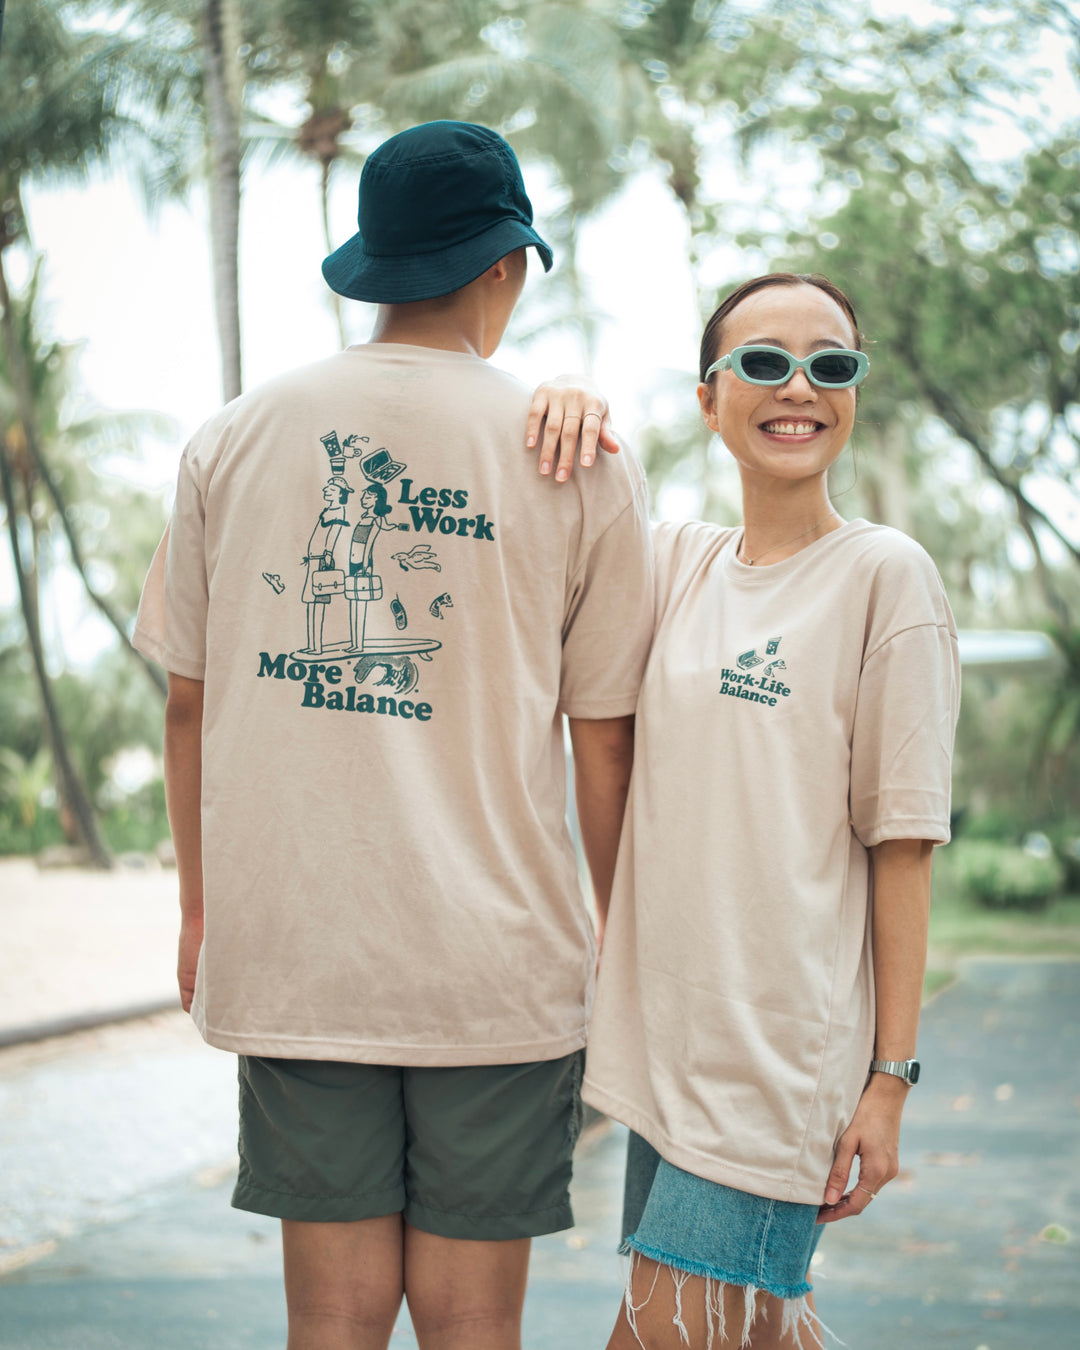 lady facing the front and man facing the back standing side by side in a graphic t shirt